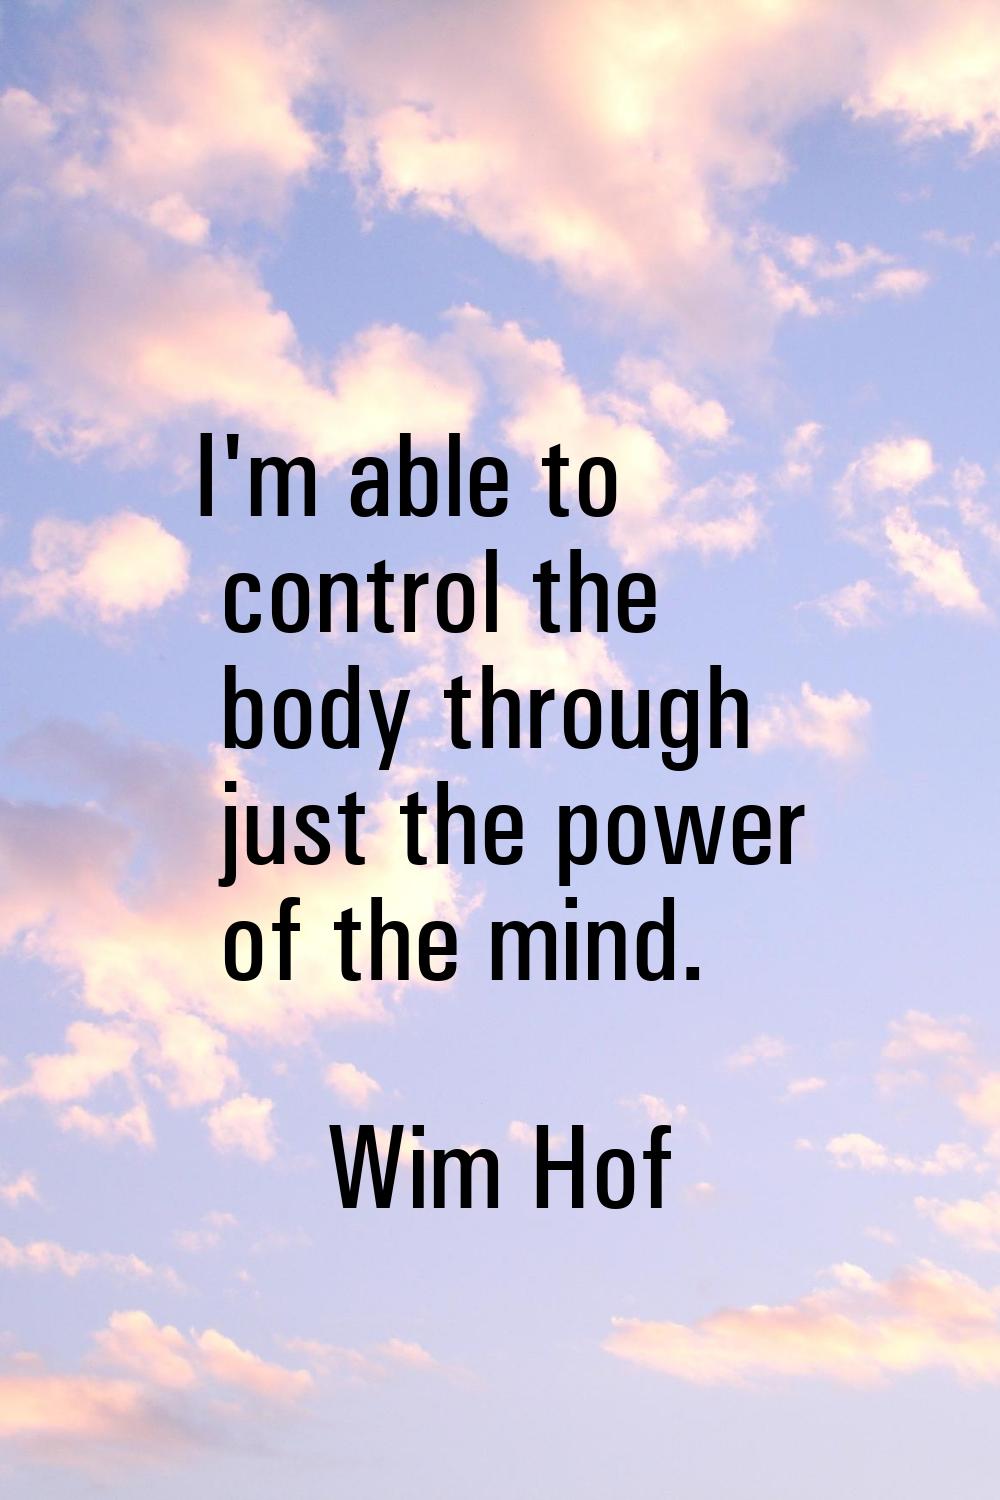 I'm able to control the body through just the power of the mind.